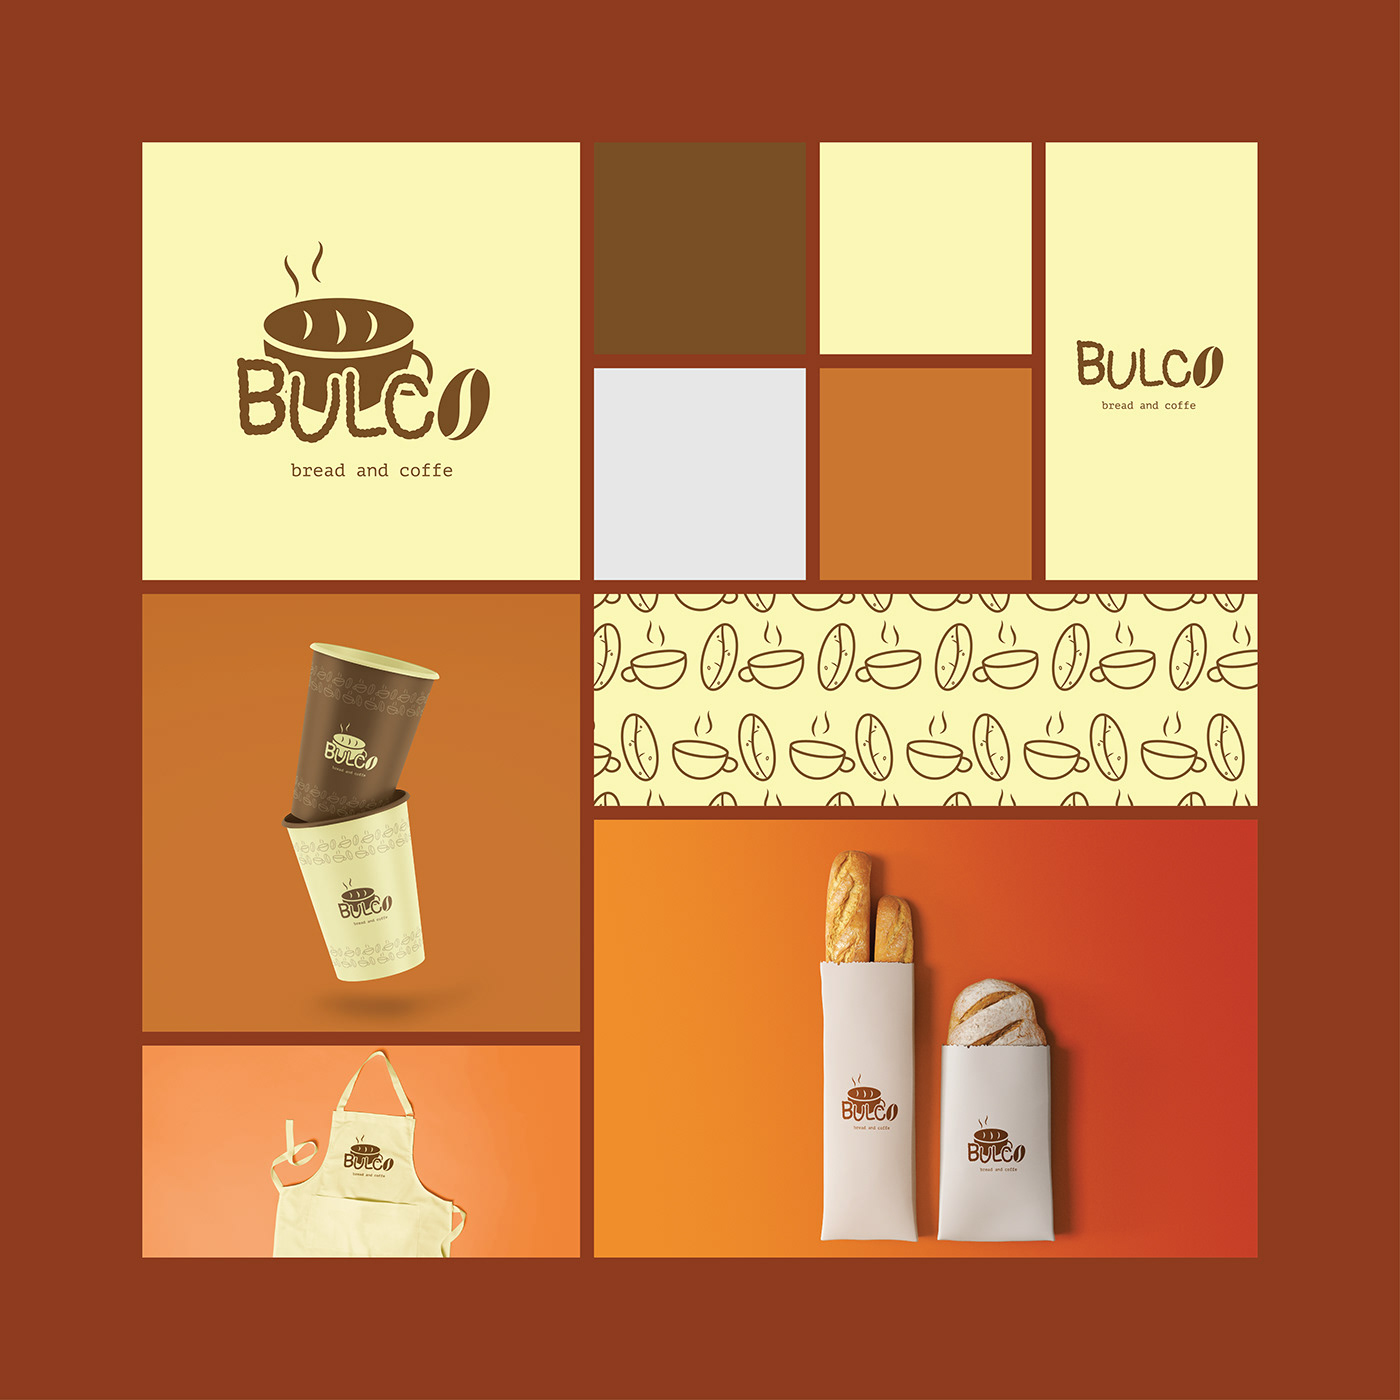 BULCO food and beverage brand identity with mockups :: Behance